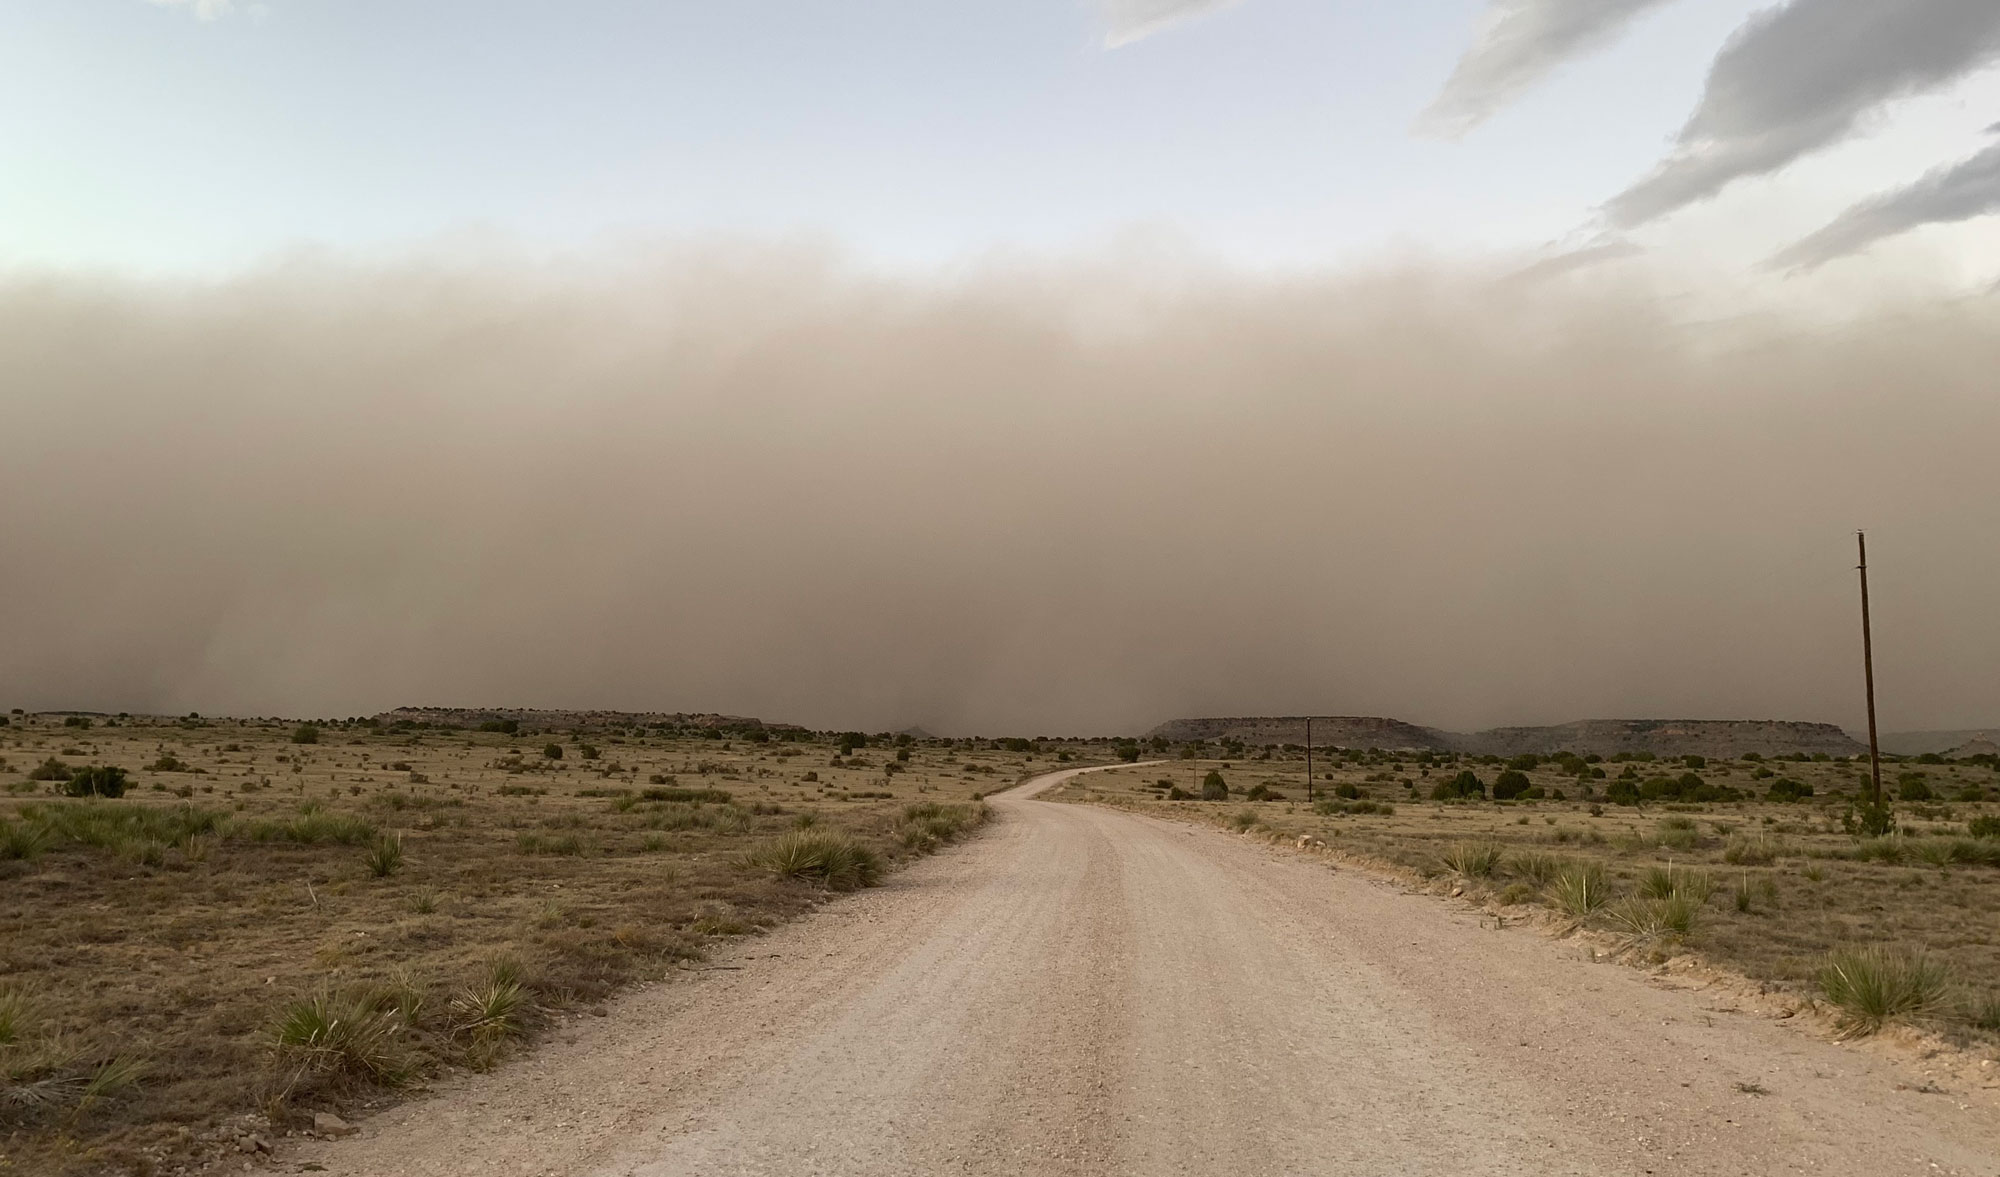 Photograph of a dust storm in Cimmaron County, Oklahoma, in 2011. The image shows a dirt road bisecting the foreground and veering right, with grass and yuccas on either side. On the horizon, a dust cloud can be seen over low hills.